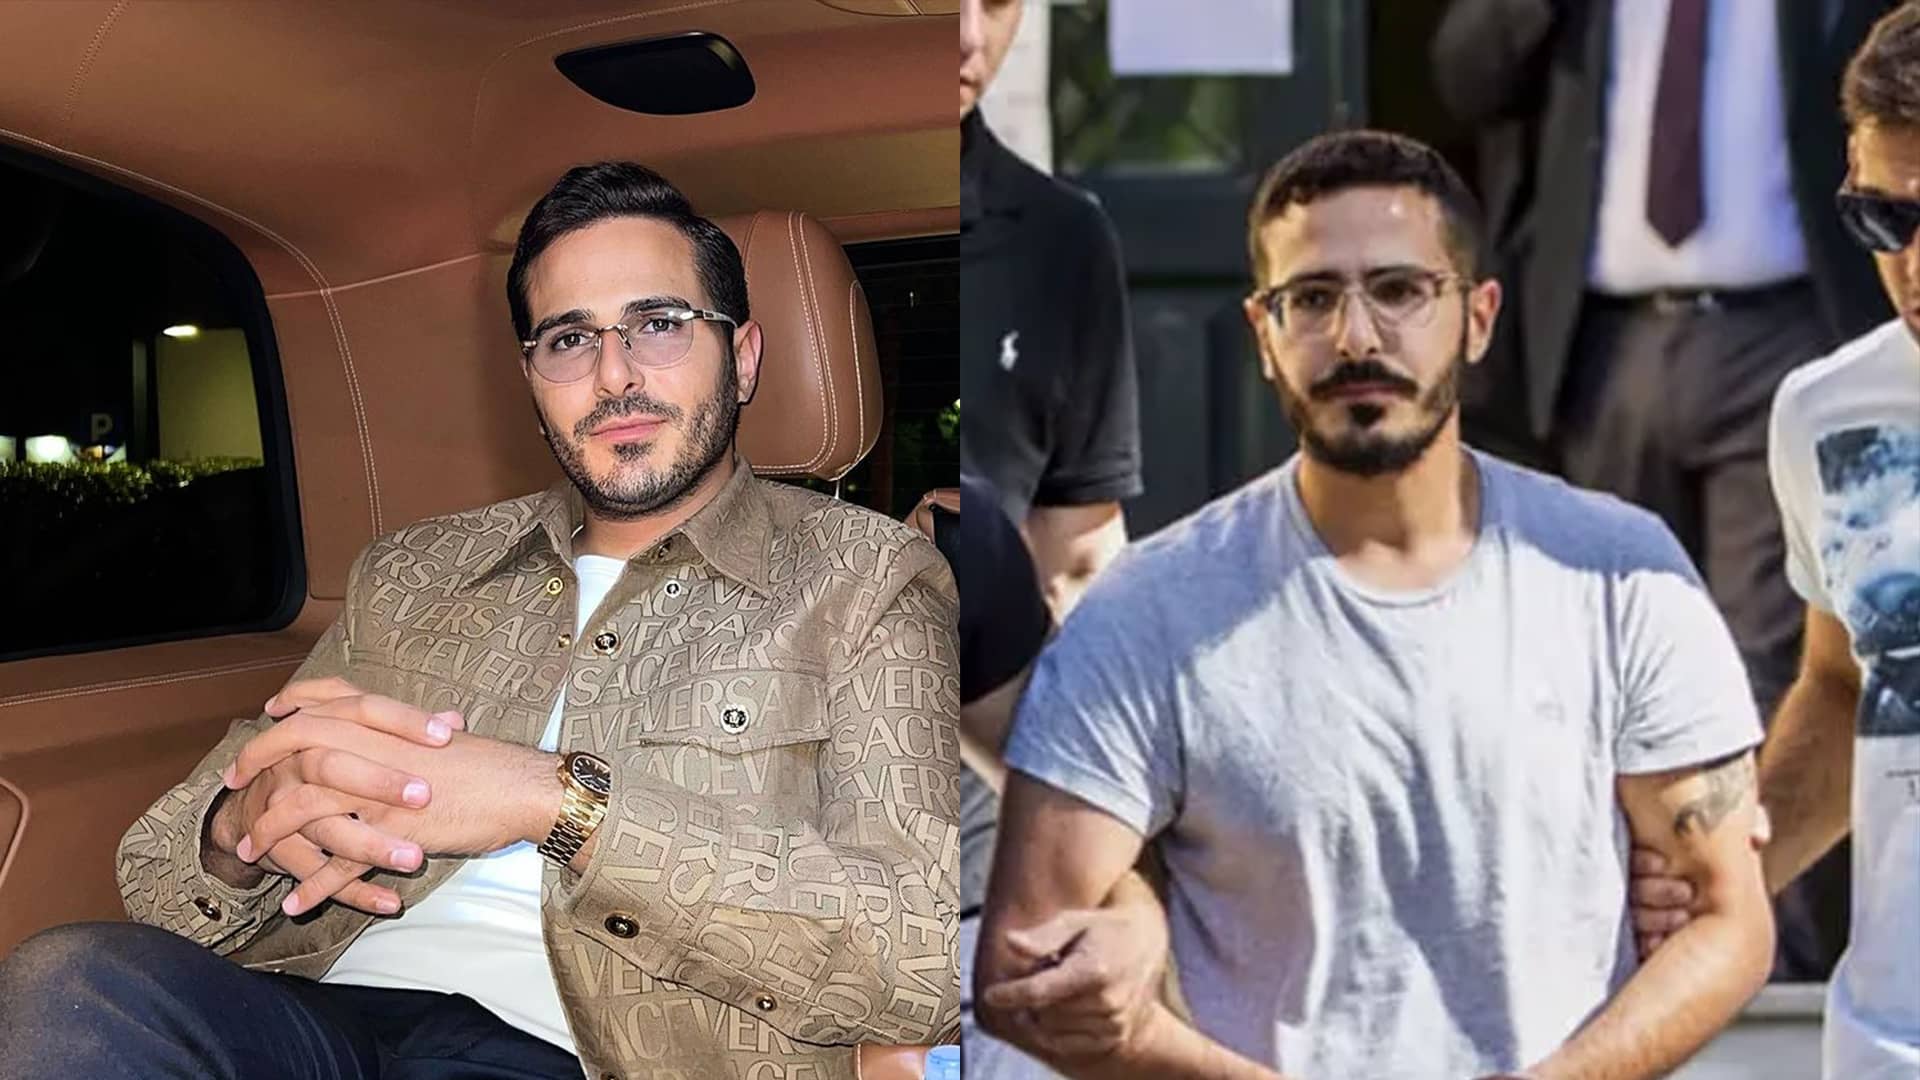 Side-by-side comparison of Tinder Swindler Simon Leviev in a luxury car and Simon Leviev in handcuffs